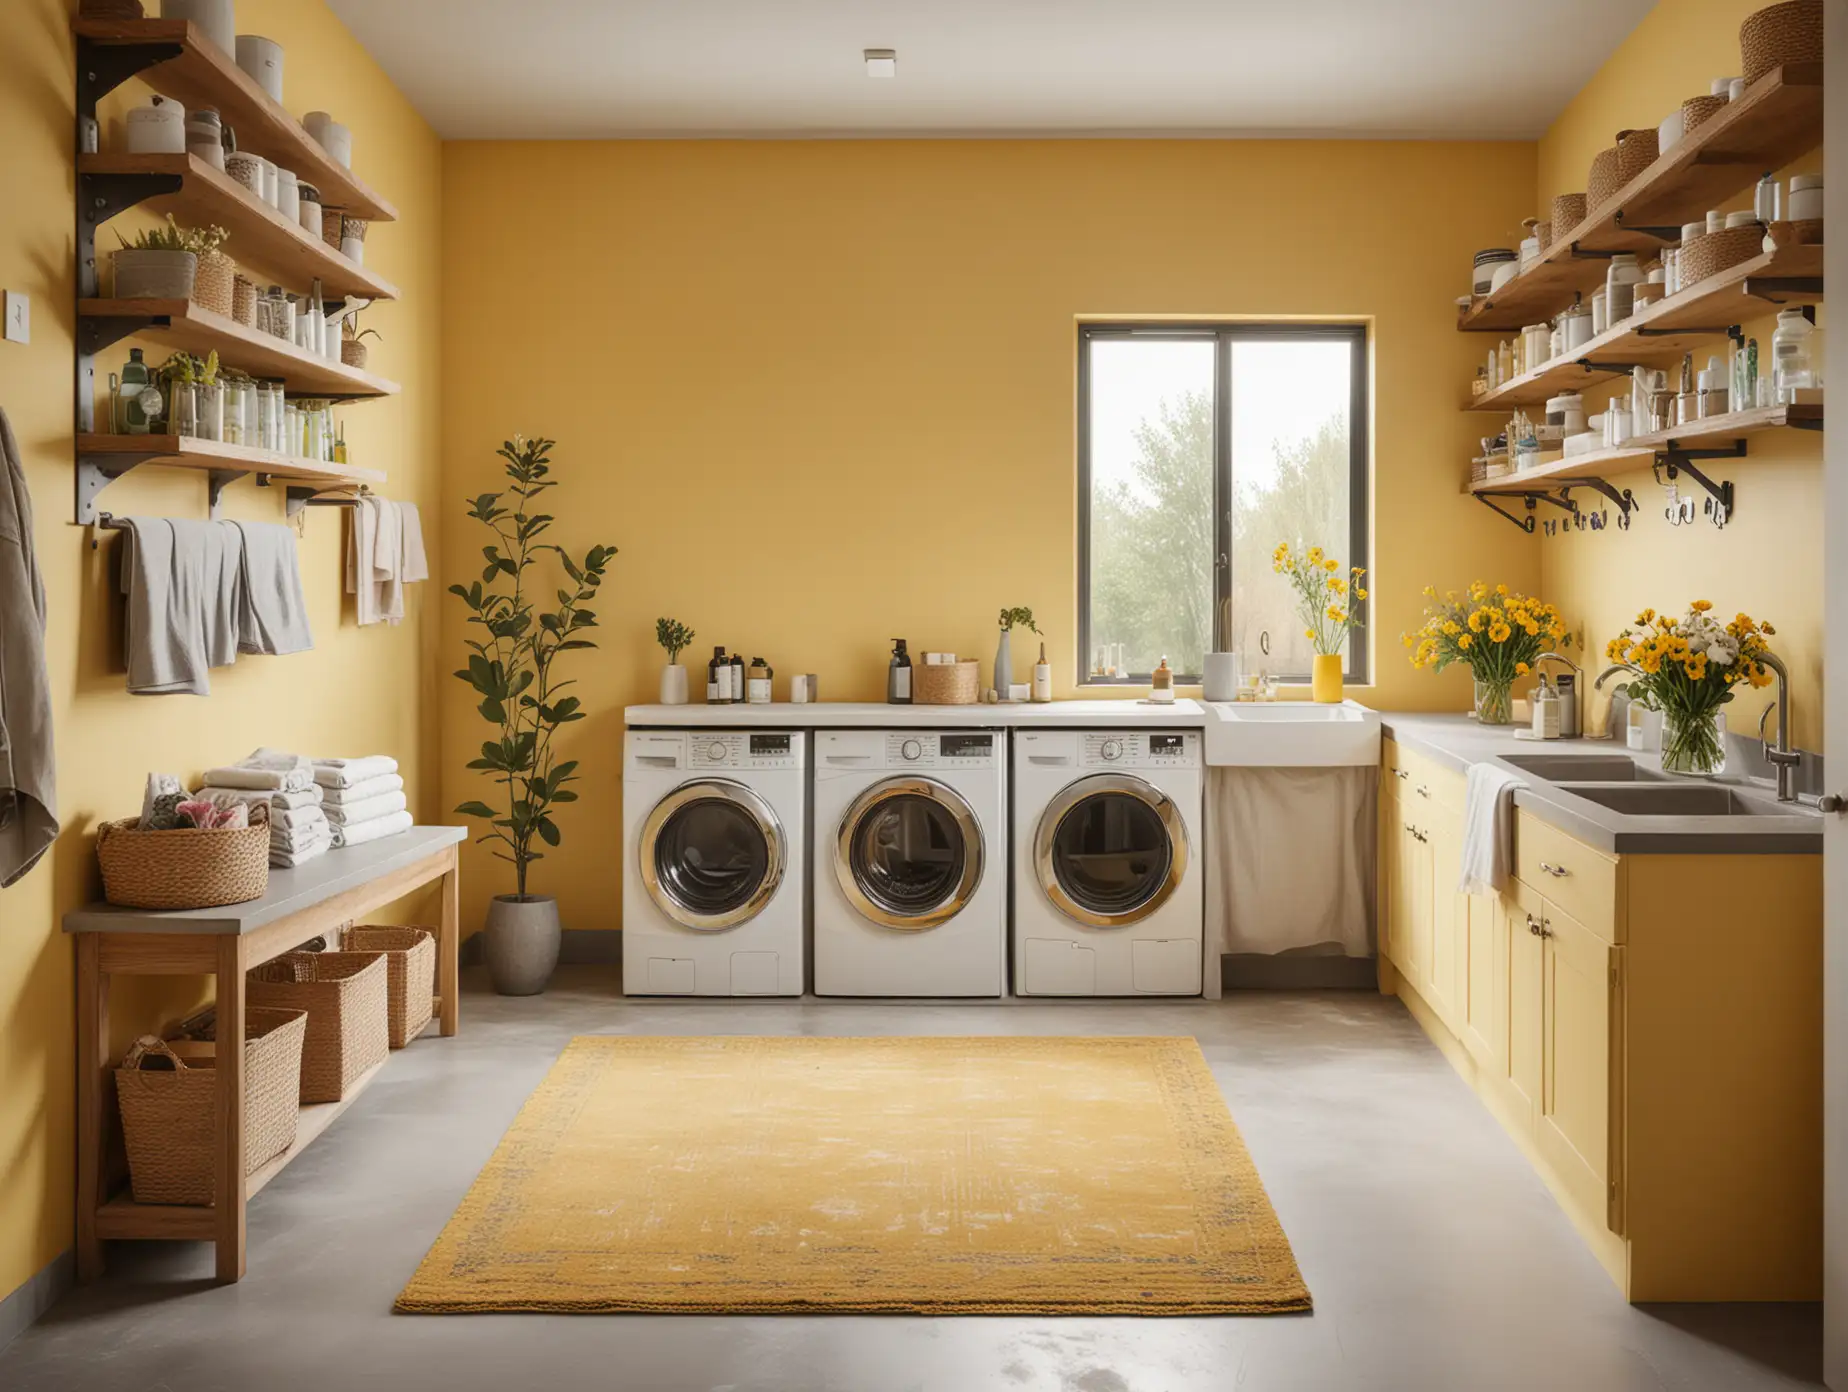 Modern-Laundry-Room-with-Cozy-Rug-and-Fresh-Flowers